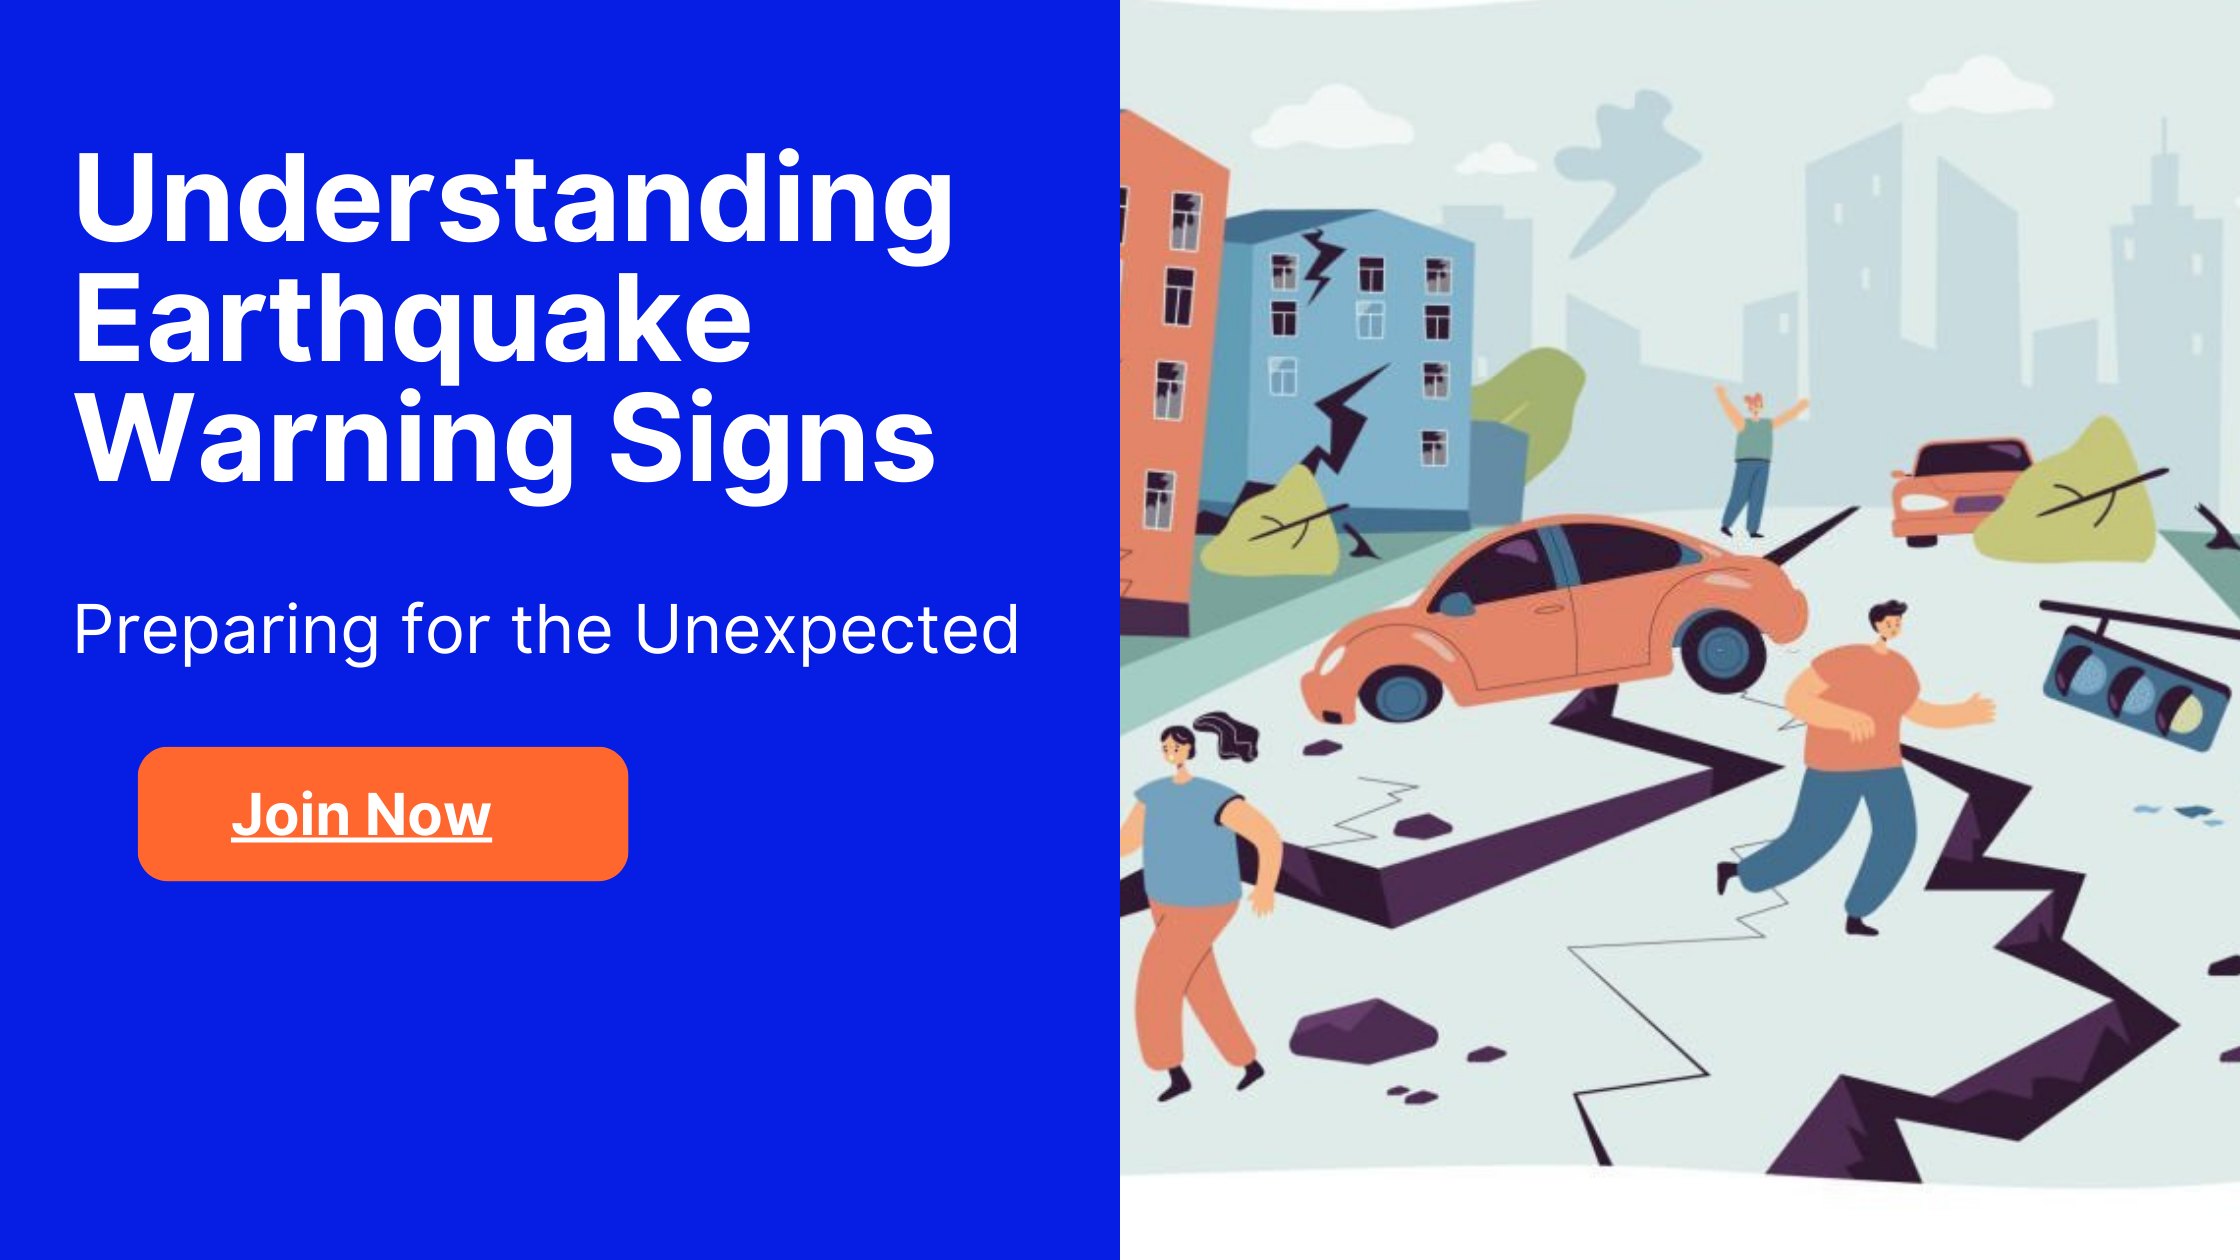 10 Crucial Earthquake Warning Signs You Should Never Ignore